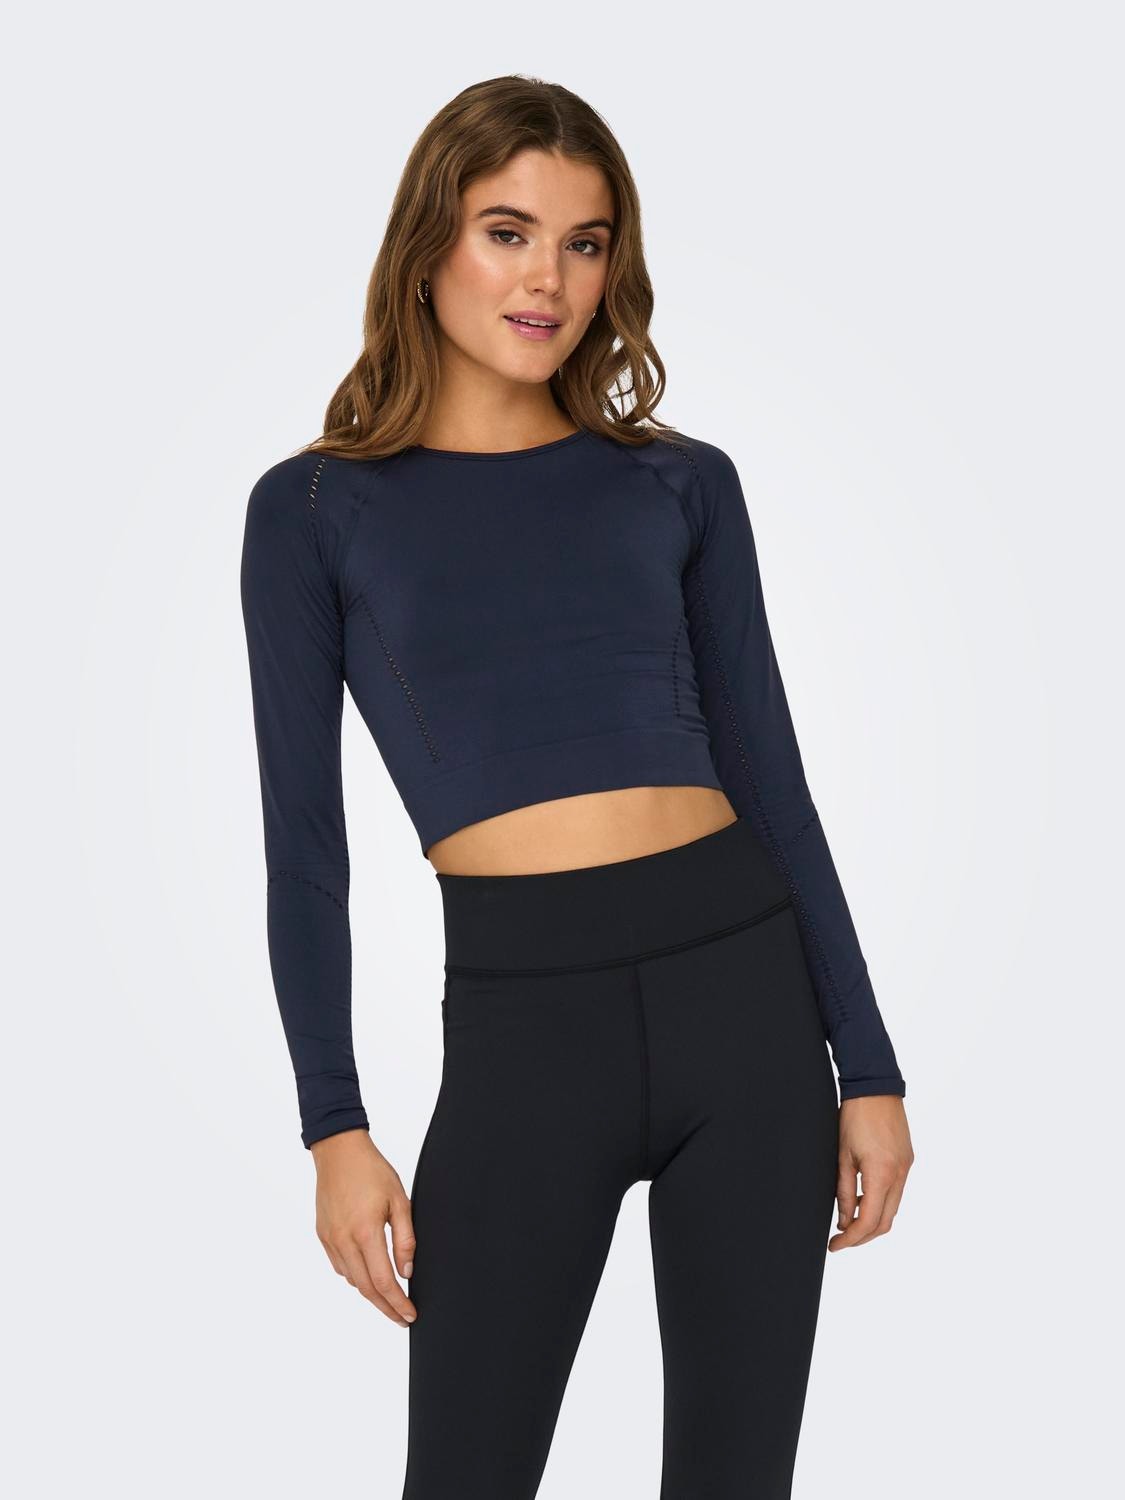 ONLY Tight Fit Round Neck Top -Blue Nights - 15305971